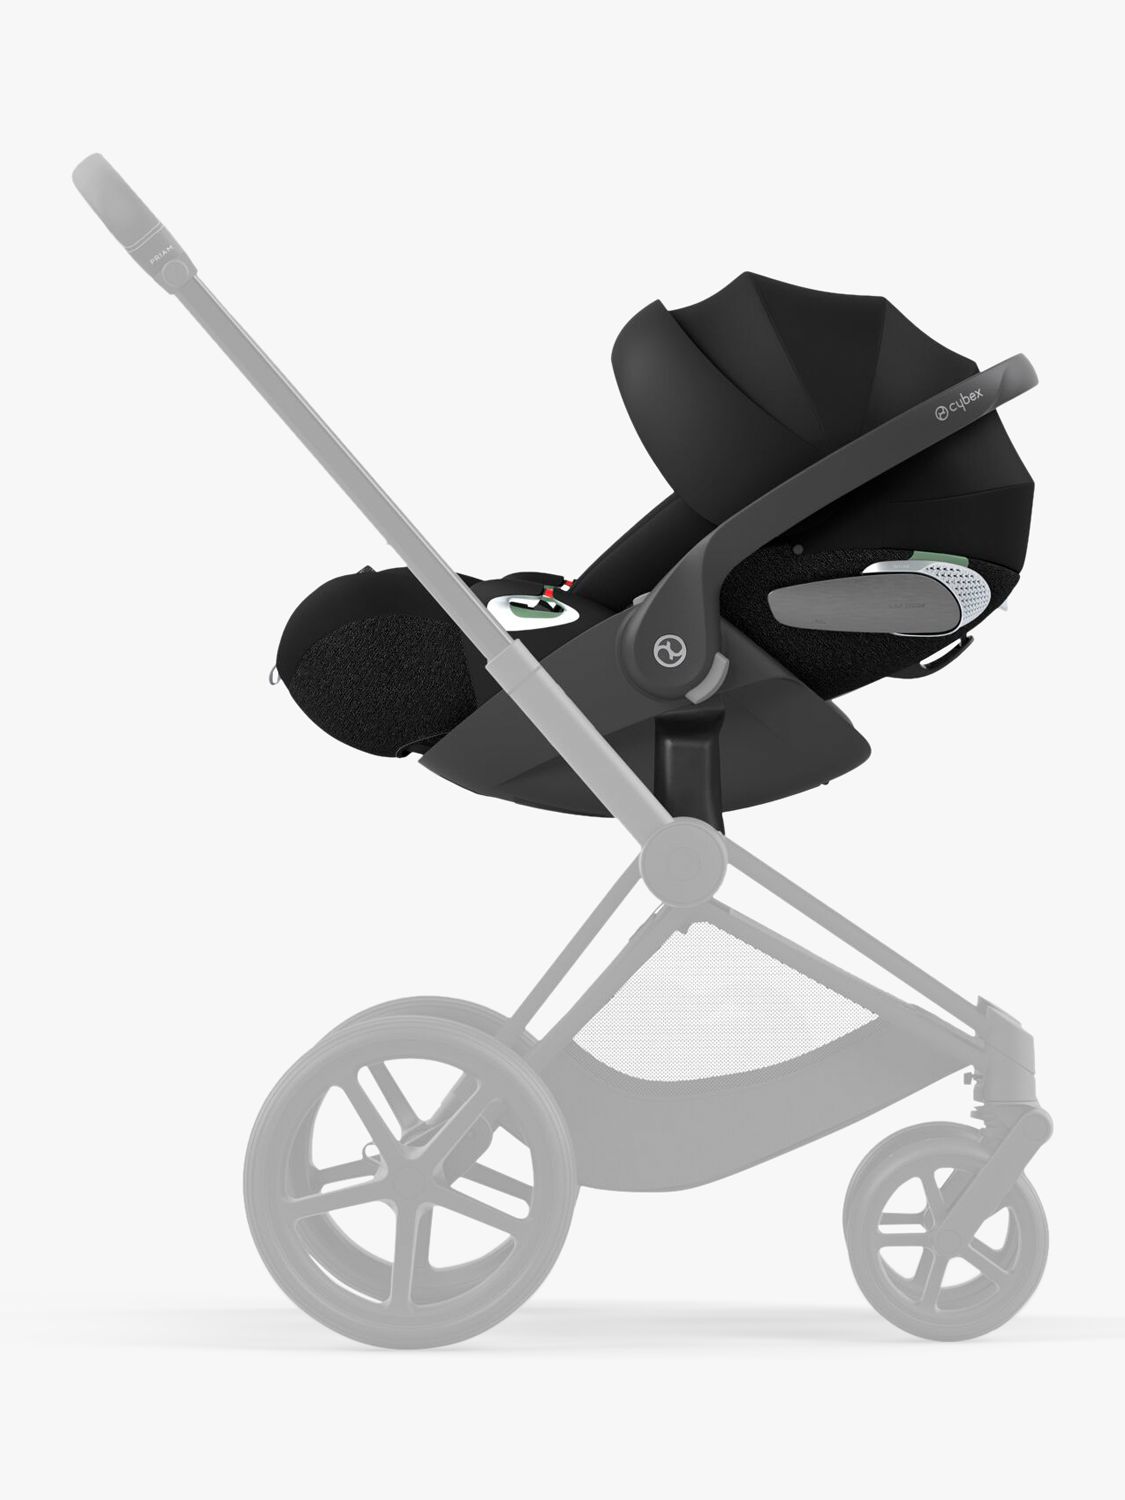 iCandy Peach 7 Pushchair & Accessories with Cybex Cloud T Baby Car Seat and Base T Bundle, Ivy/Black